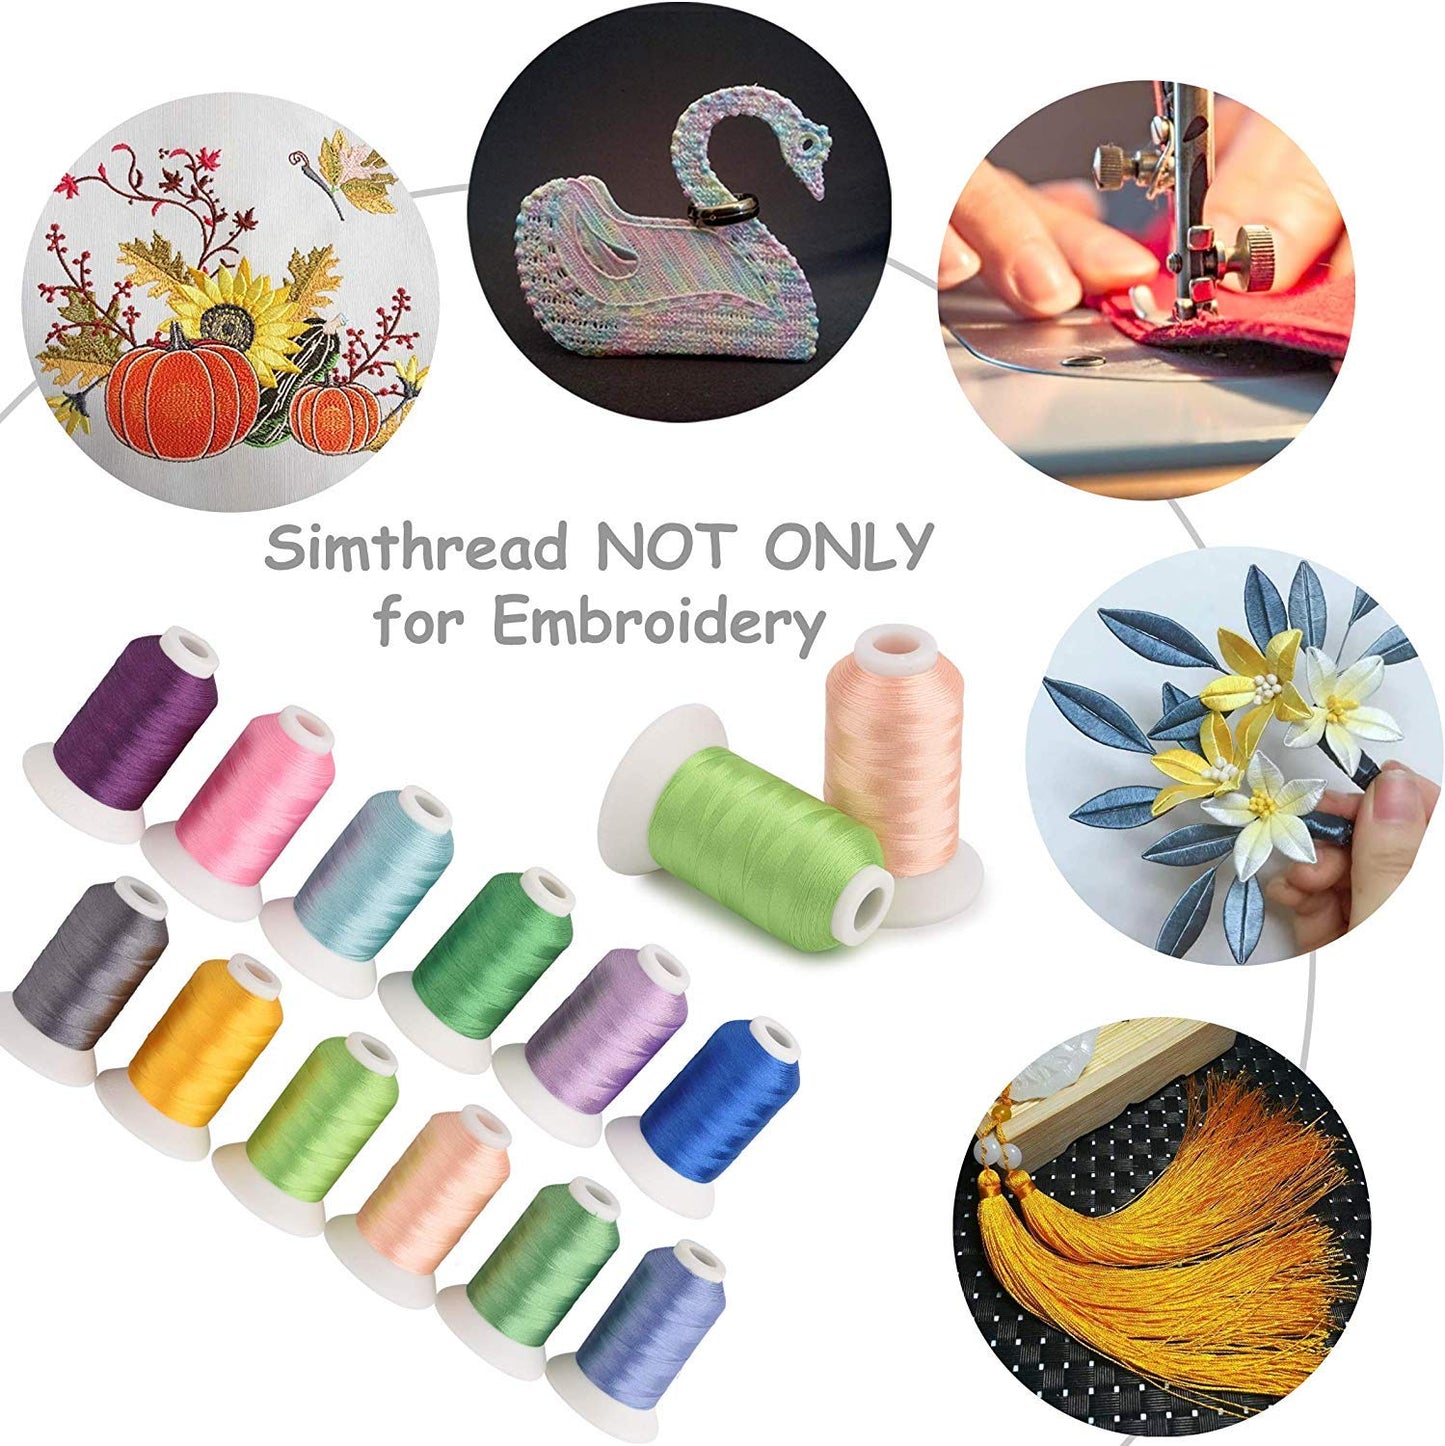 Simthread Brother 40 Colors 40 Weight Polyester Embroidery Machine Thread Kit 550Y(500M) for Brother Babylock Janome Singer Husqvarna Bernina Embroidery and Sewing Machines